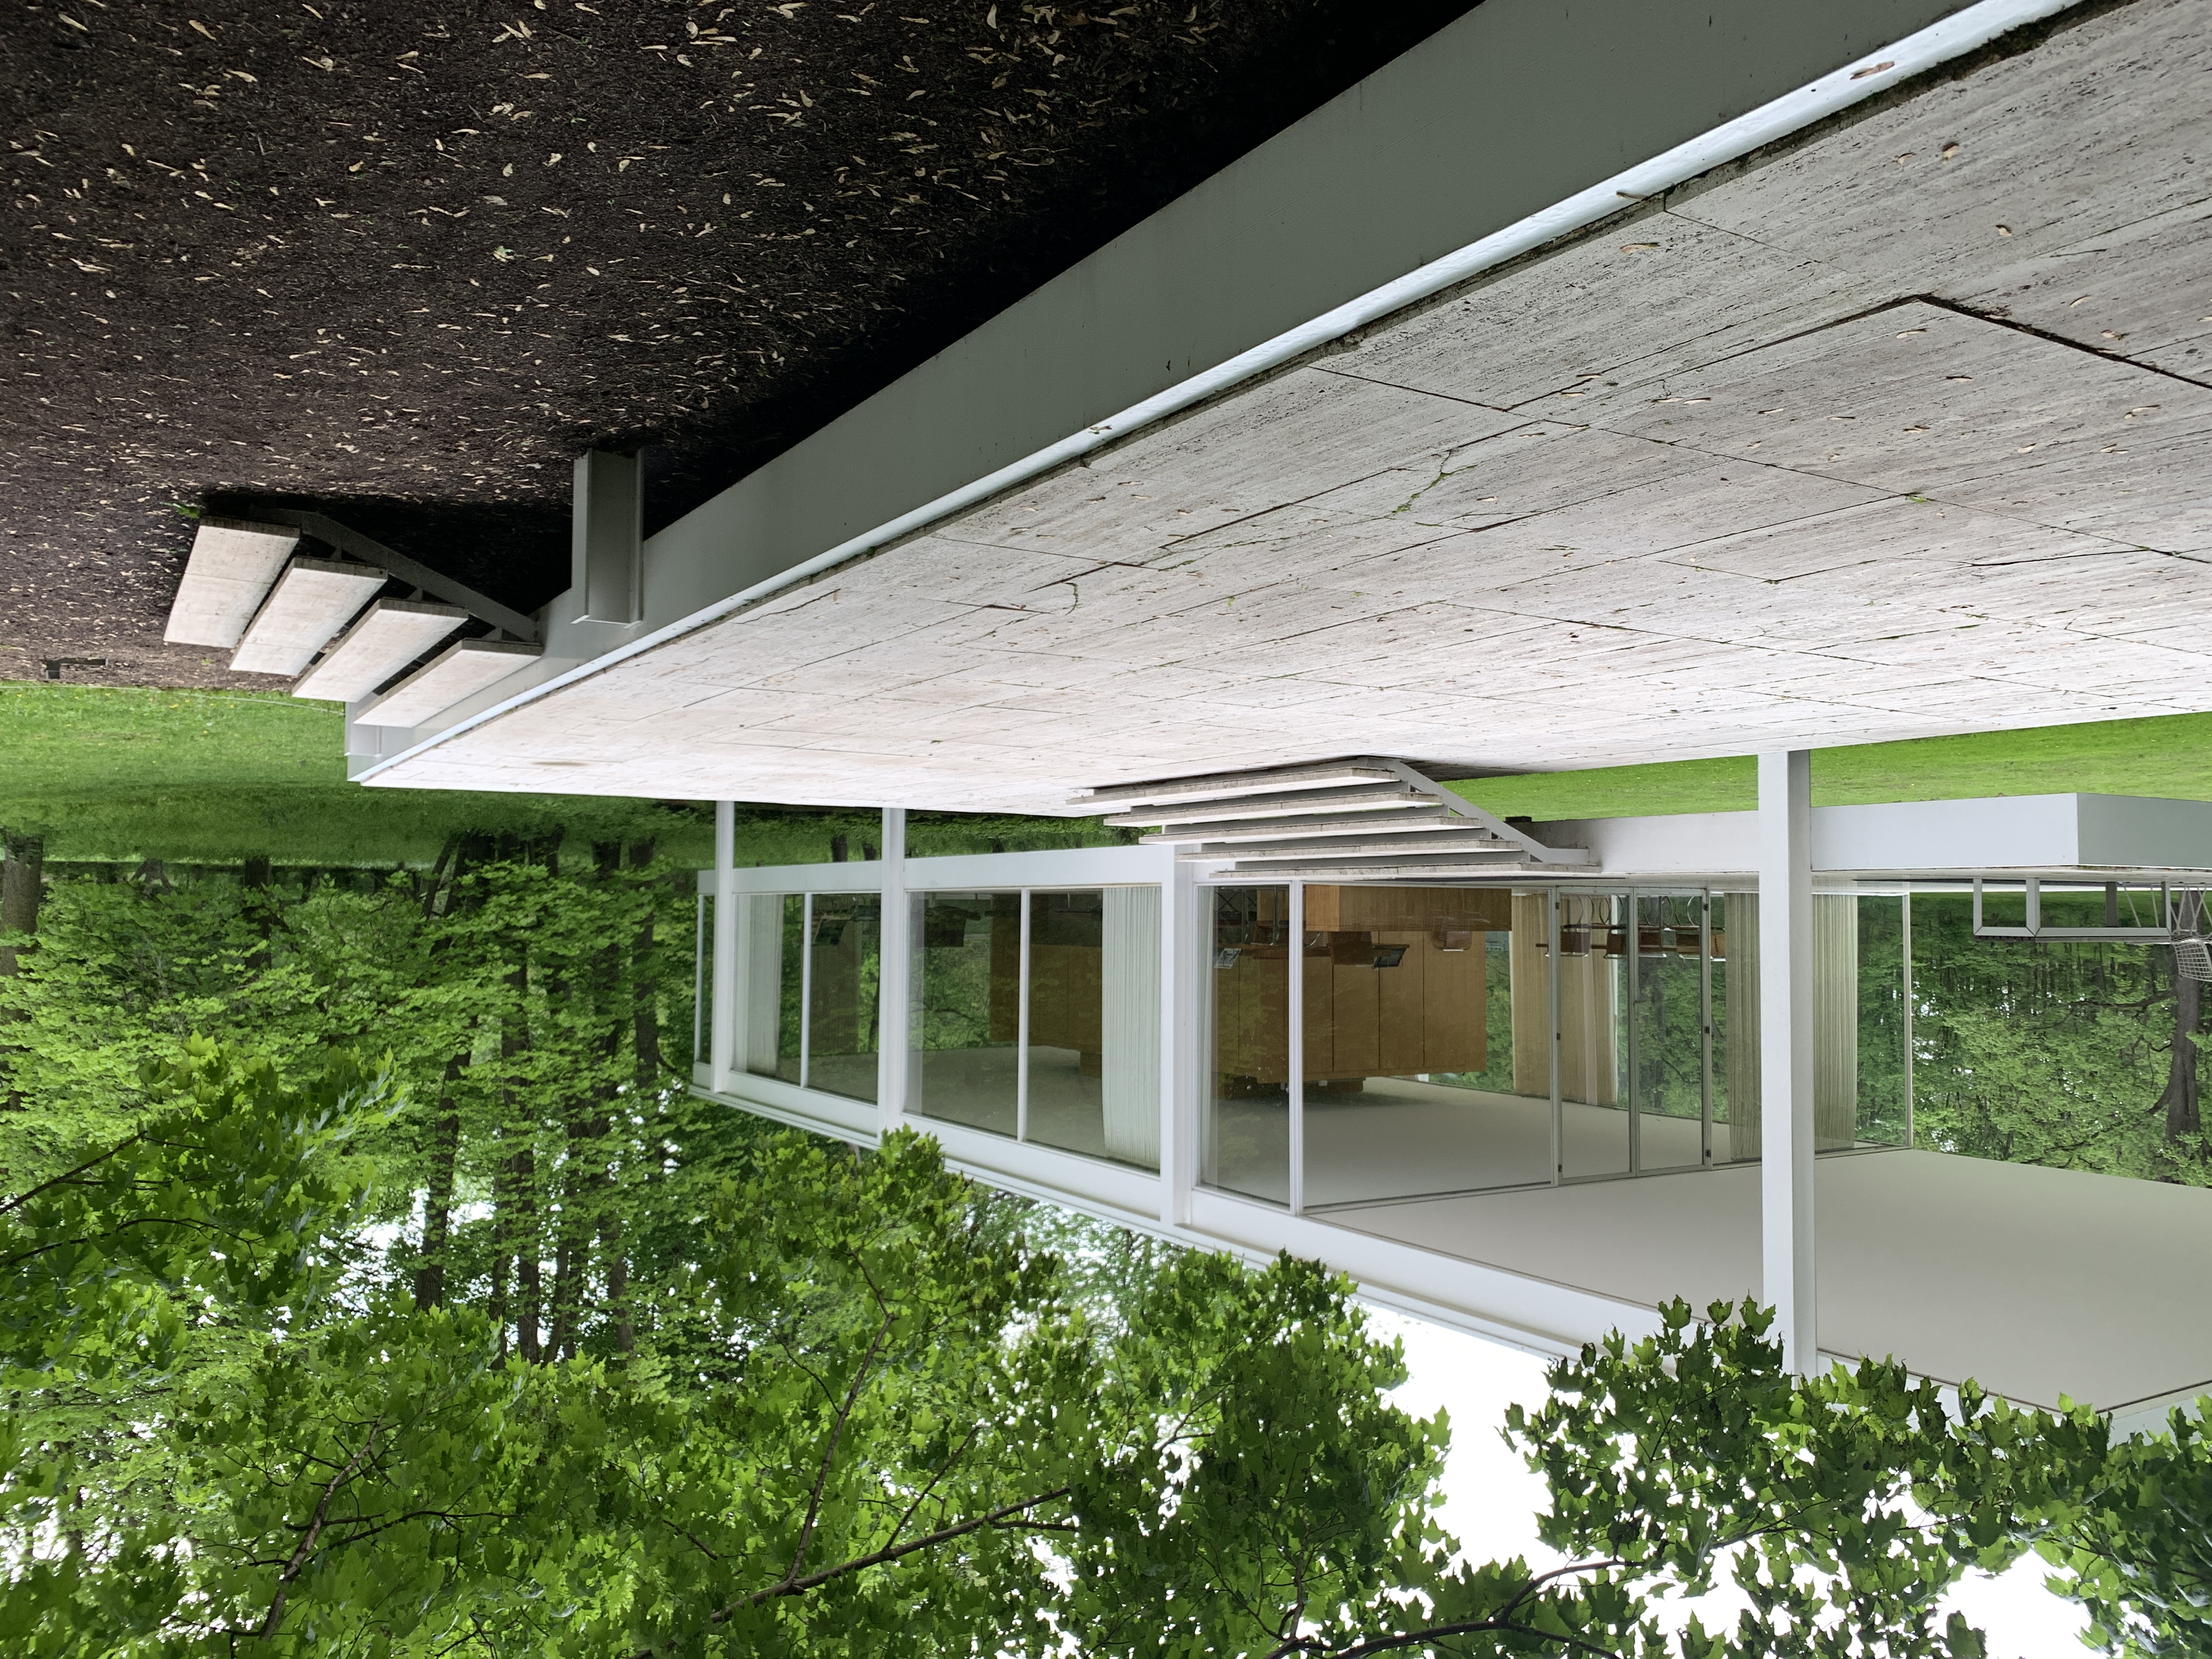 File:Farnsworth House in Plano, IL. Designed by Ludwig Mies van der Rohe in  1949. (47930459907).jpg - Wikimedia Commons